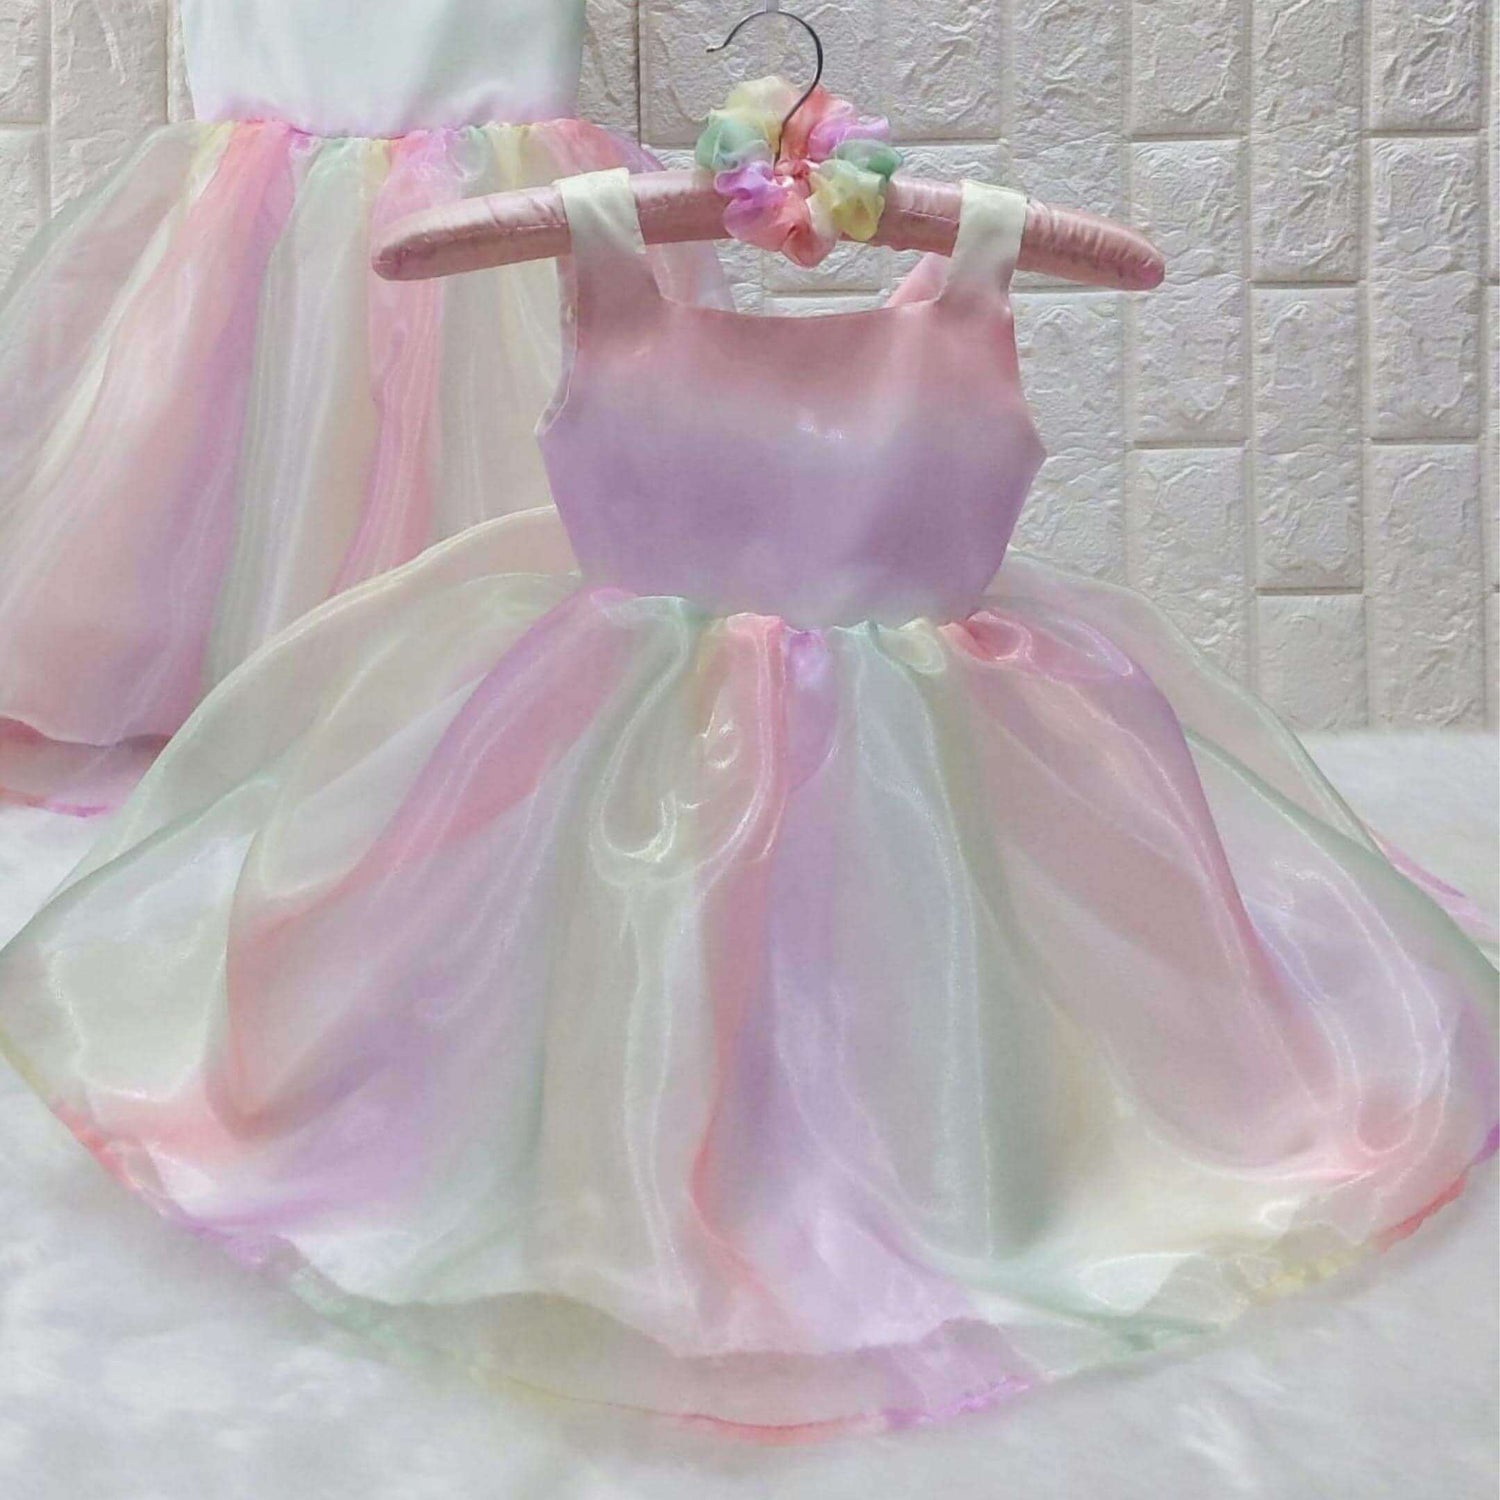 Rainbow Theme Wear and Accessories for Mini Princesses